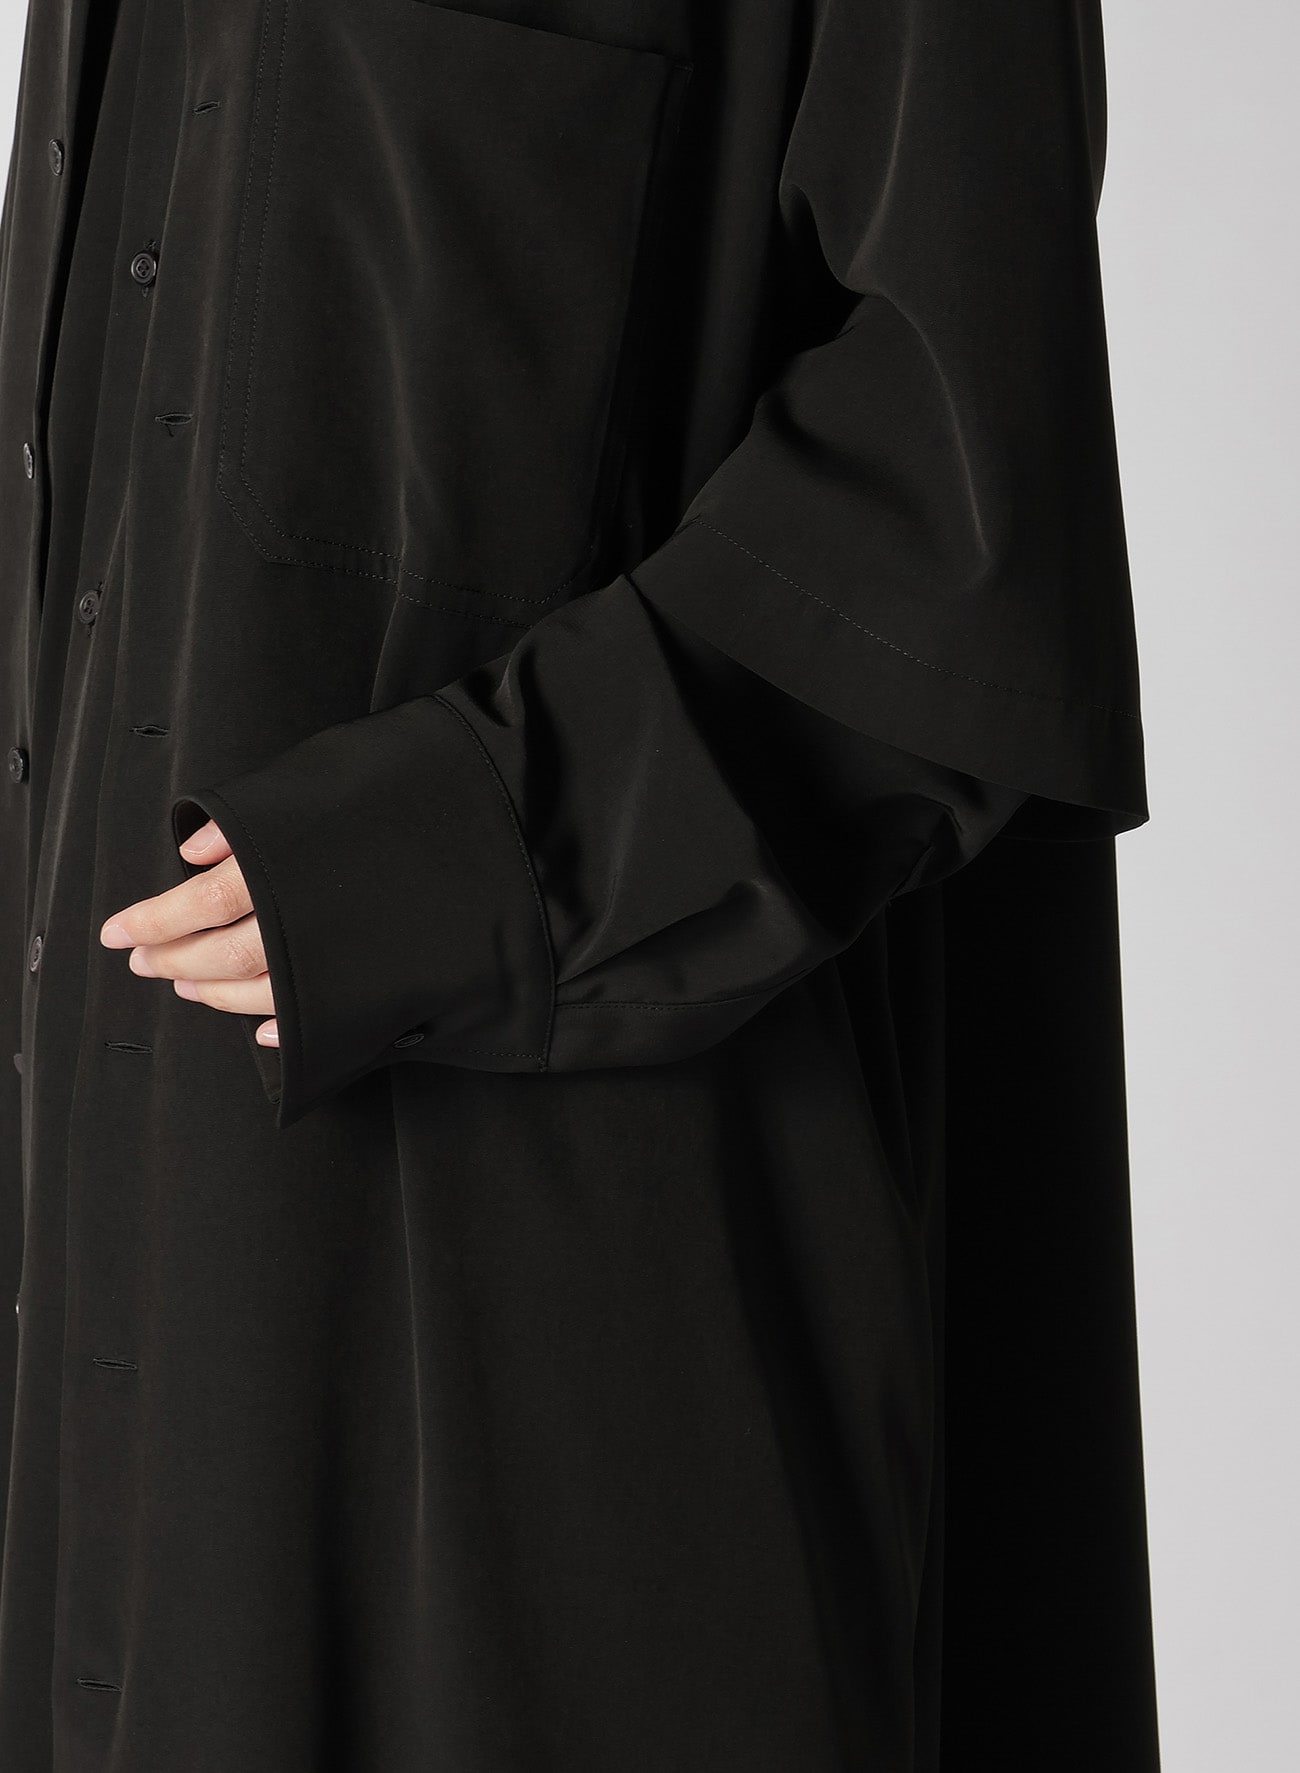 【8/7 12:00(JST) Release】TRIACETATE/POLYESTER DOUBLE LAYERED LONG SHIRT